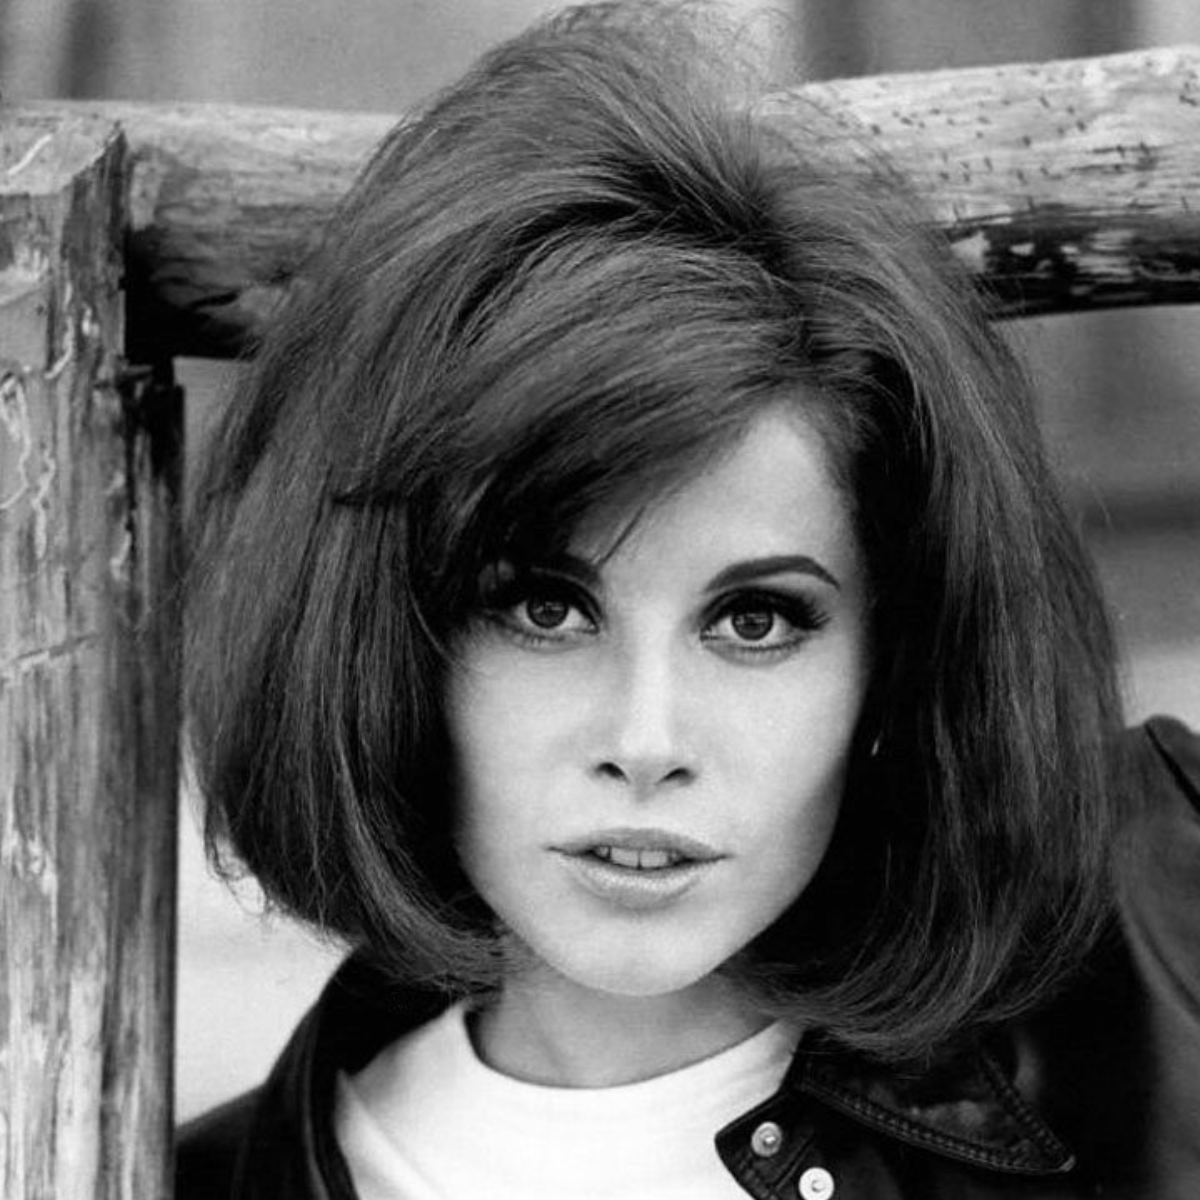 What Ever Happened to Stefanie Powers?